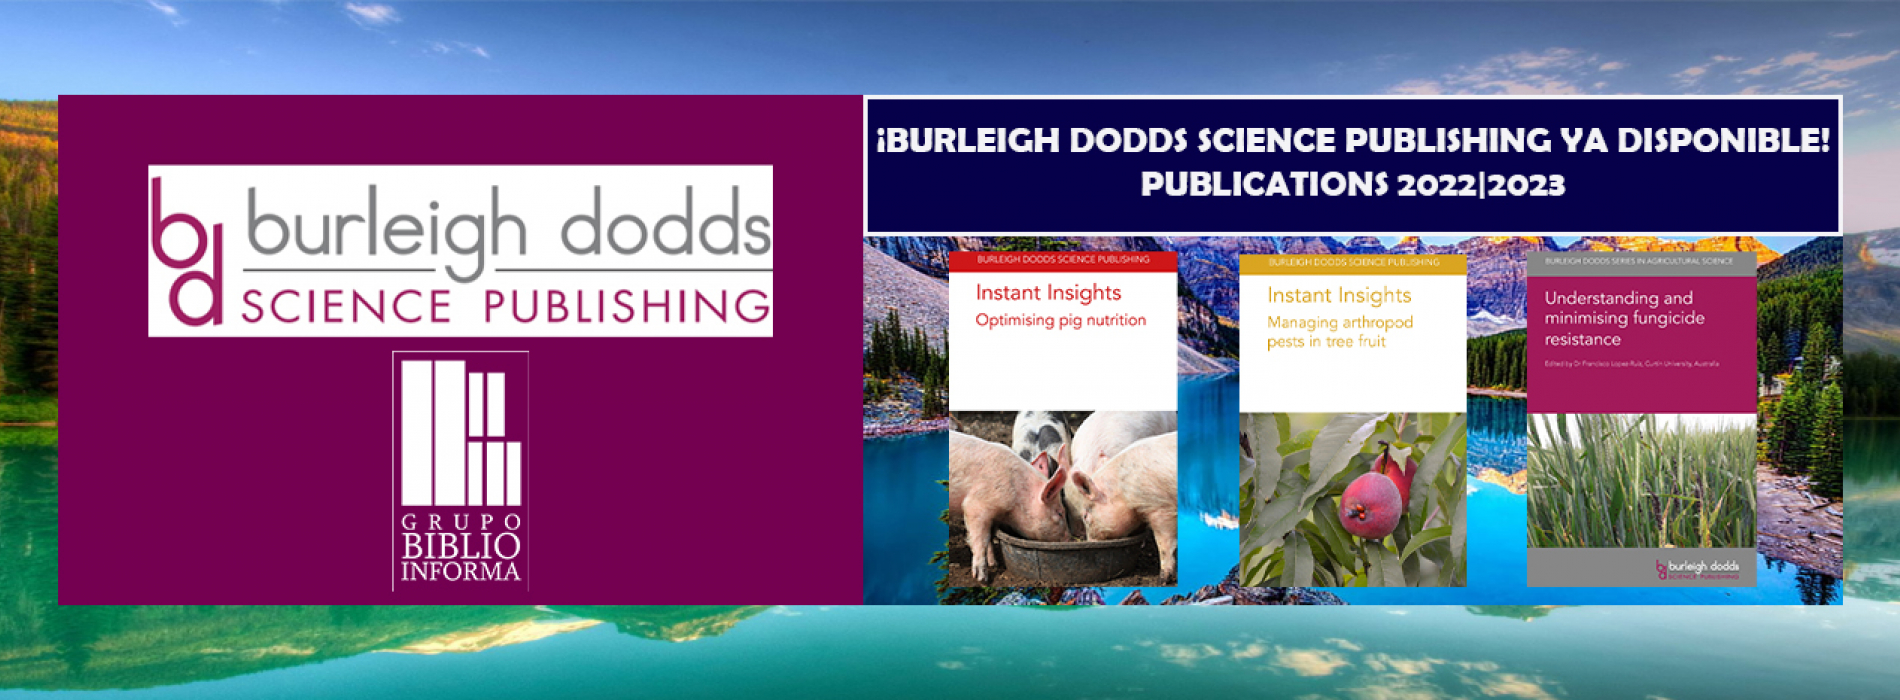 BURLEIGH DODDS - PUBLISHING SCIENCE